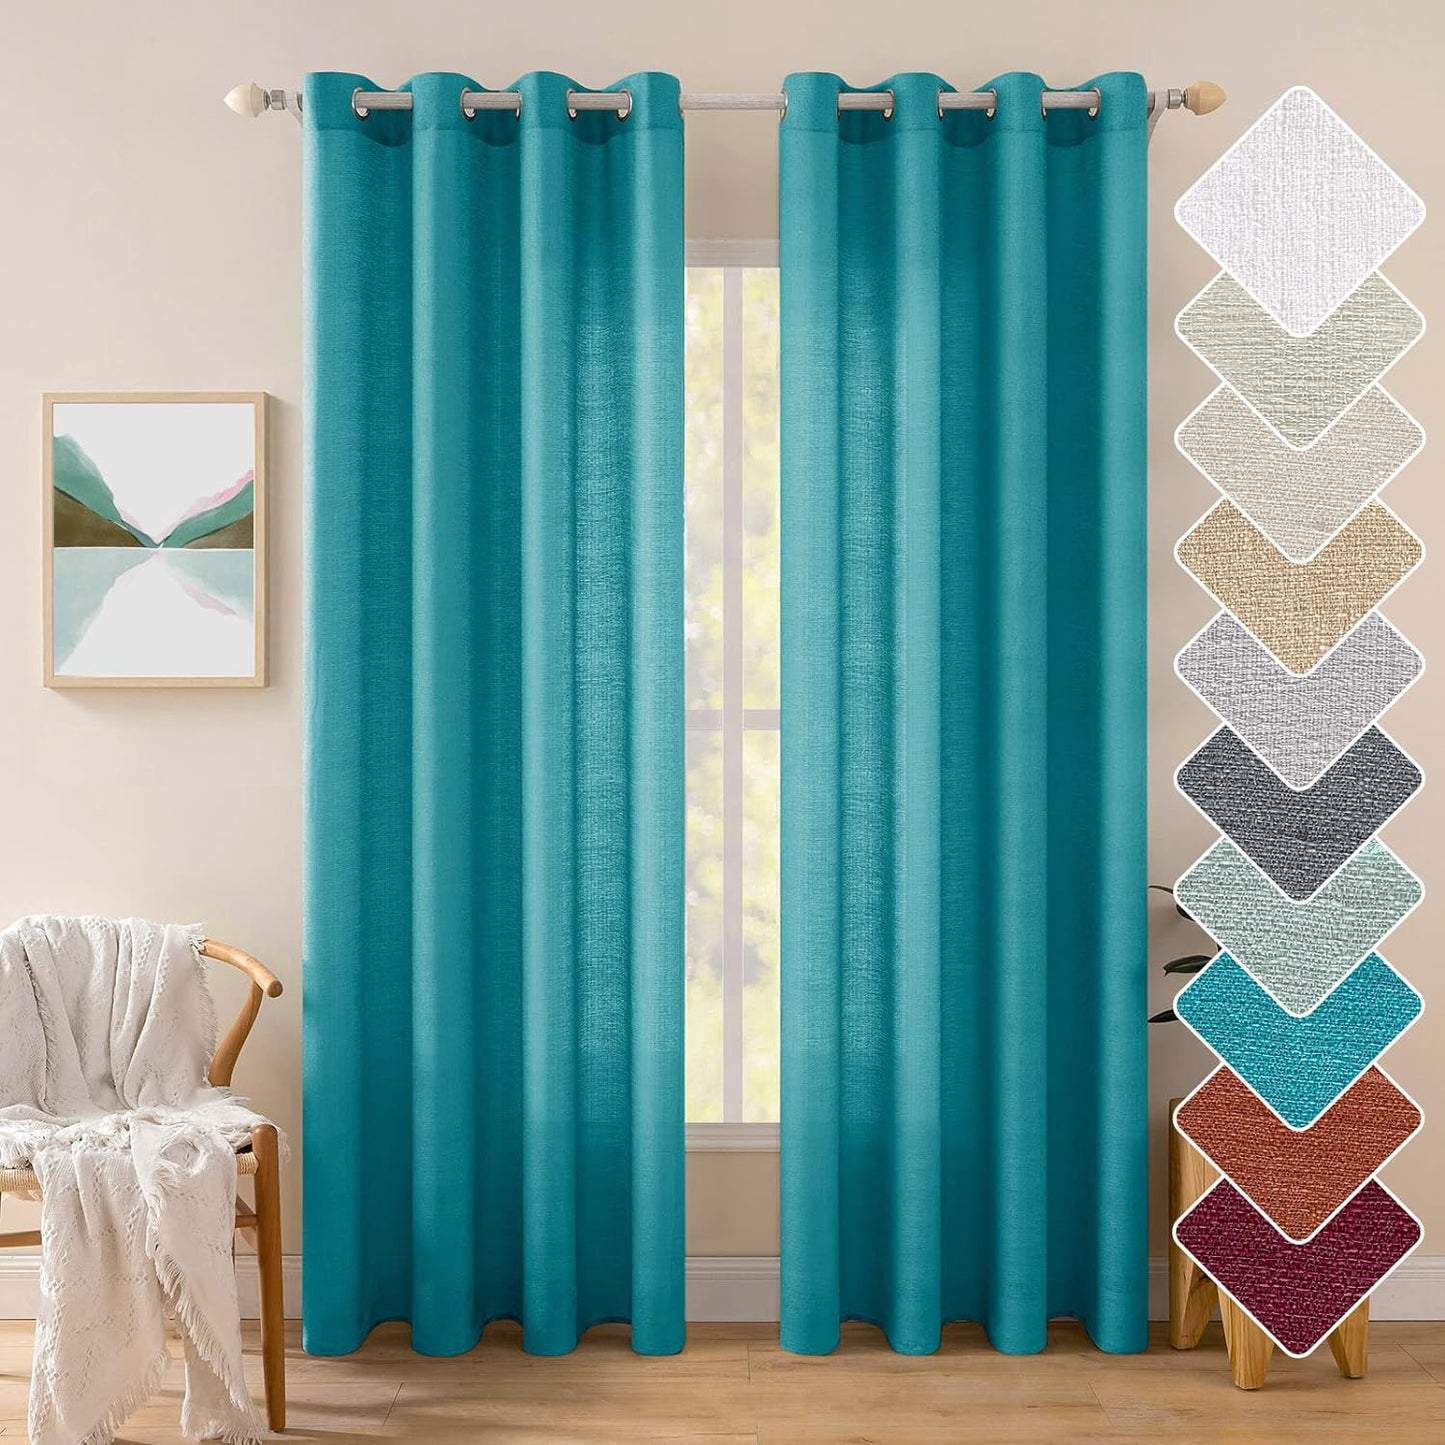 MIULEE Burnt Orange Linen Semi Sheer Curtains 2 Panels for Living Room Bedroom Linen Textured Light Filtering Privacy Window Curtains Terracotta Grommet Drapes Rust Boho Fall Decor W 52 X L 84 Inches  MIULEE Grommet | Teal Blue W52 X L84 